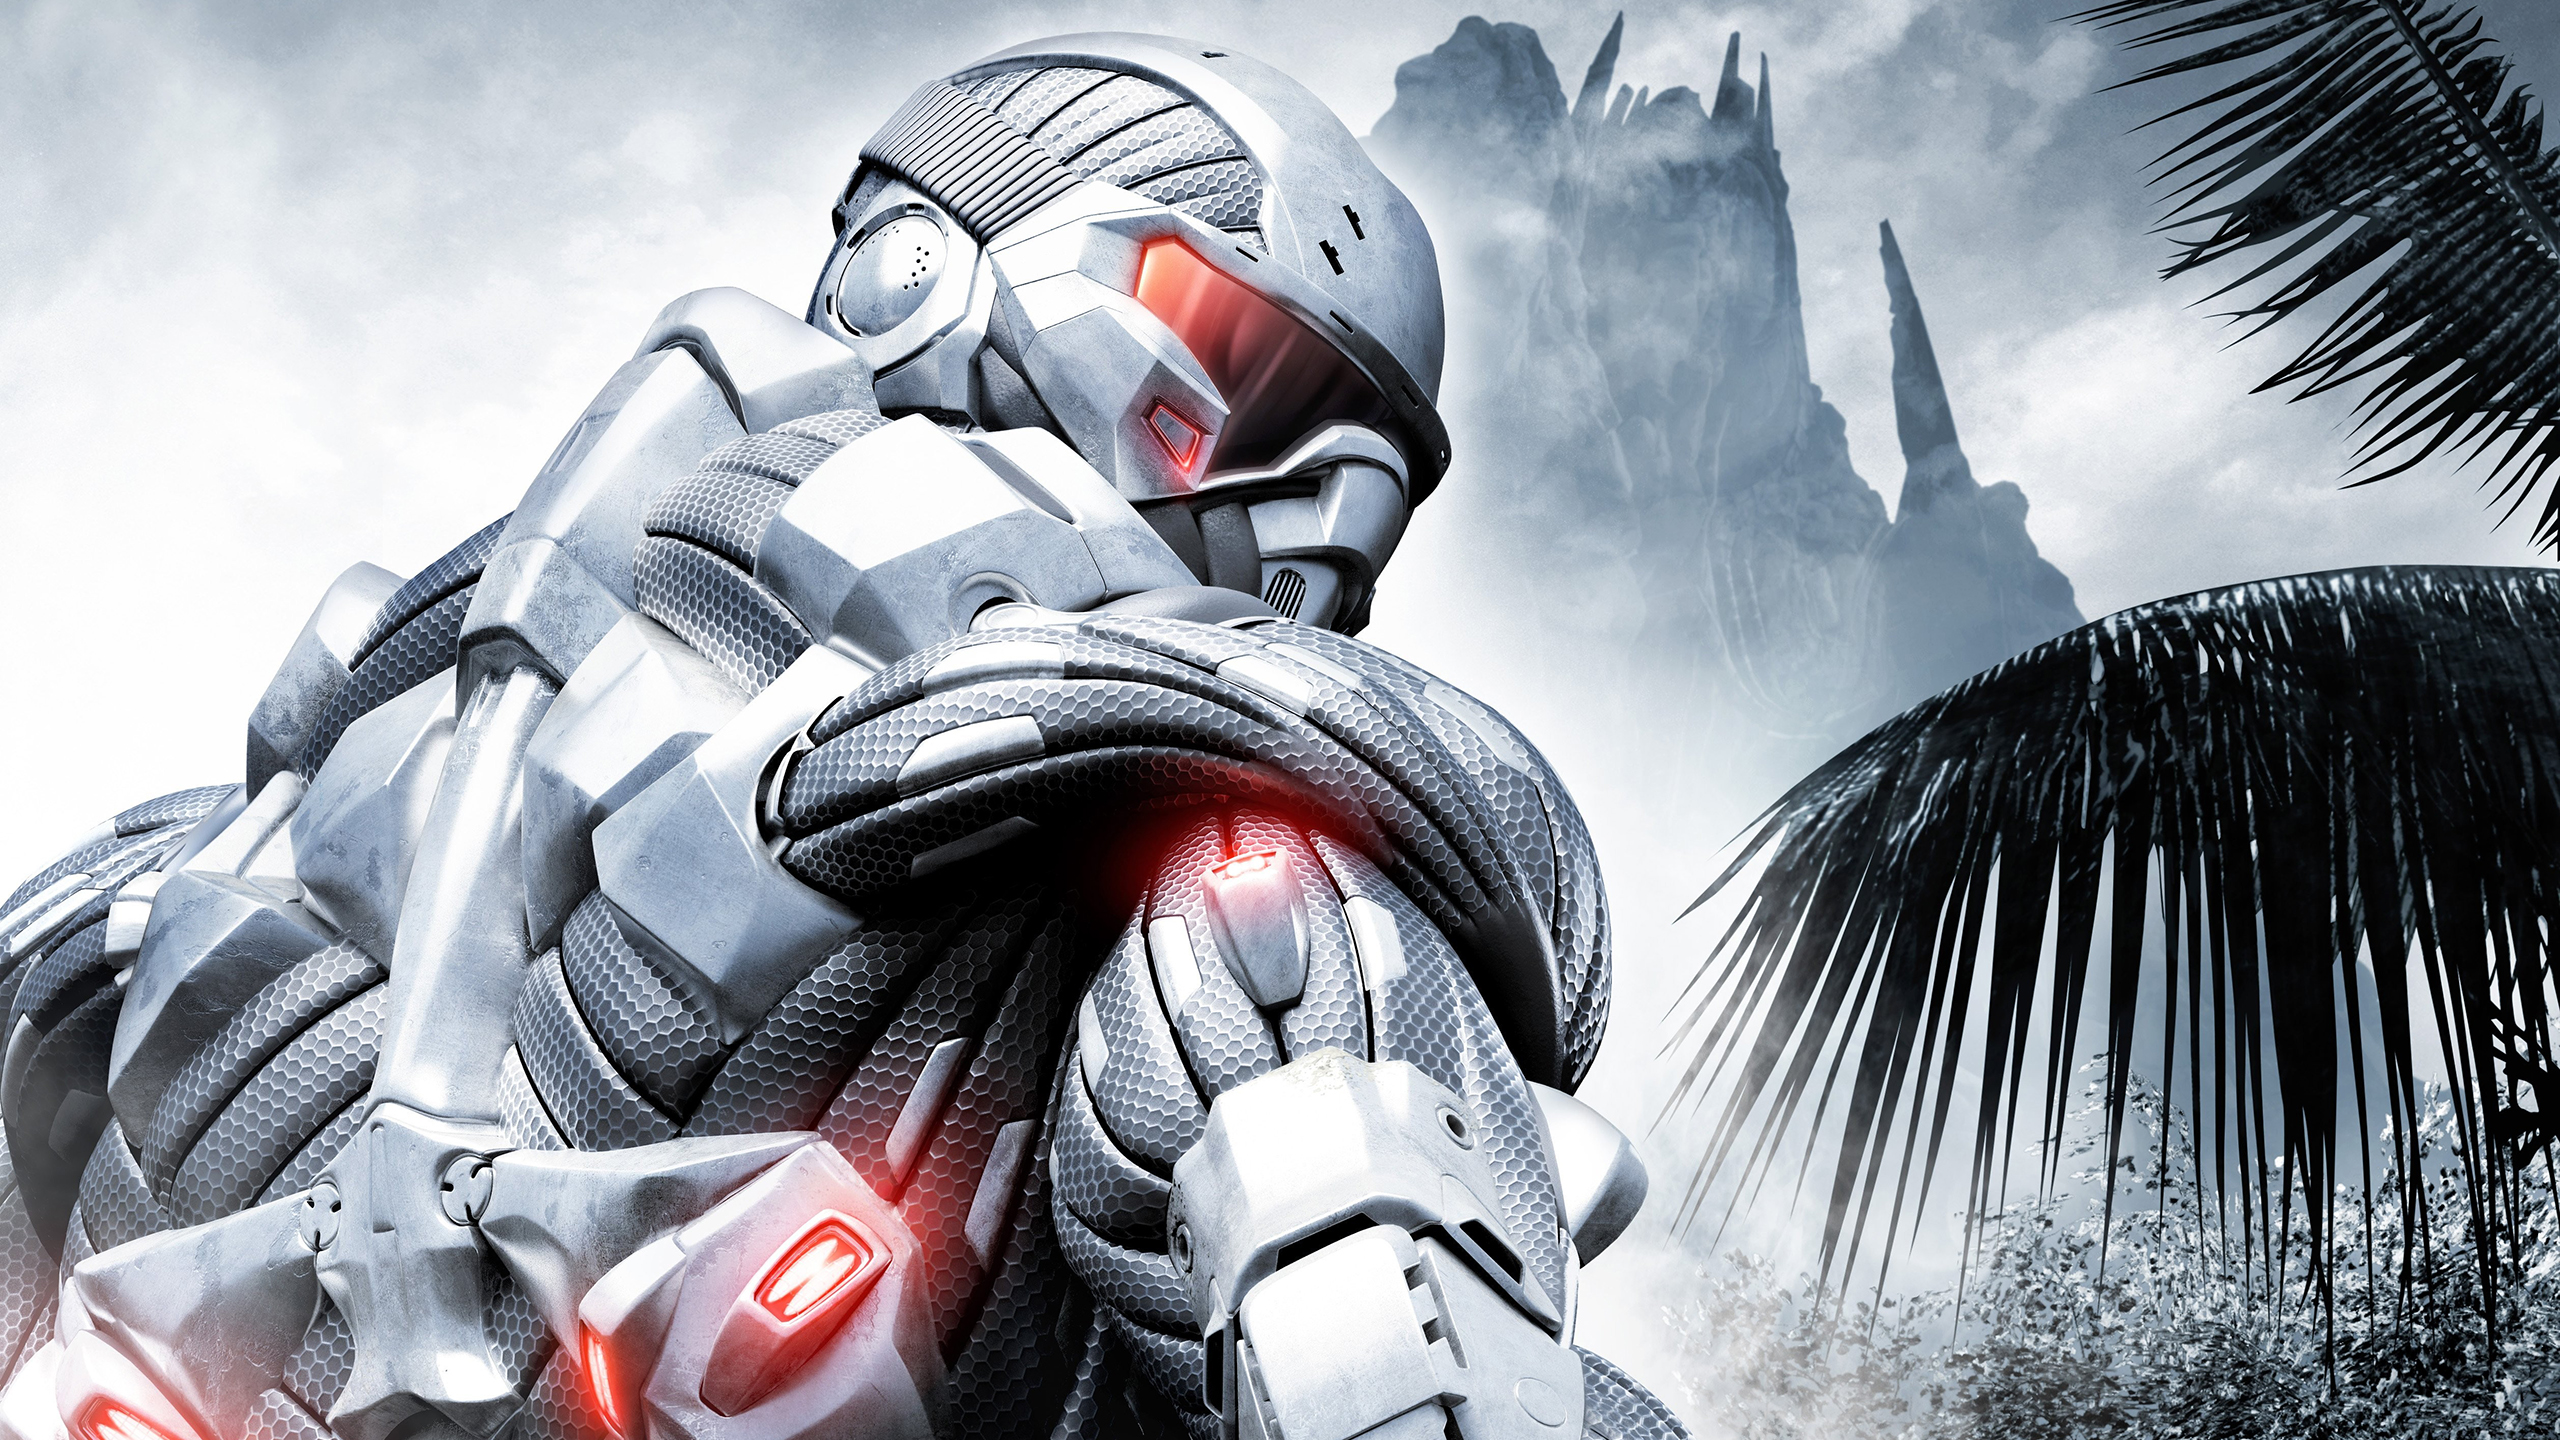 Crysis Electronic Arts Video Games 2560x1440